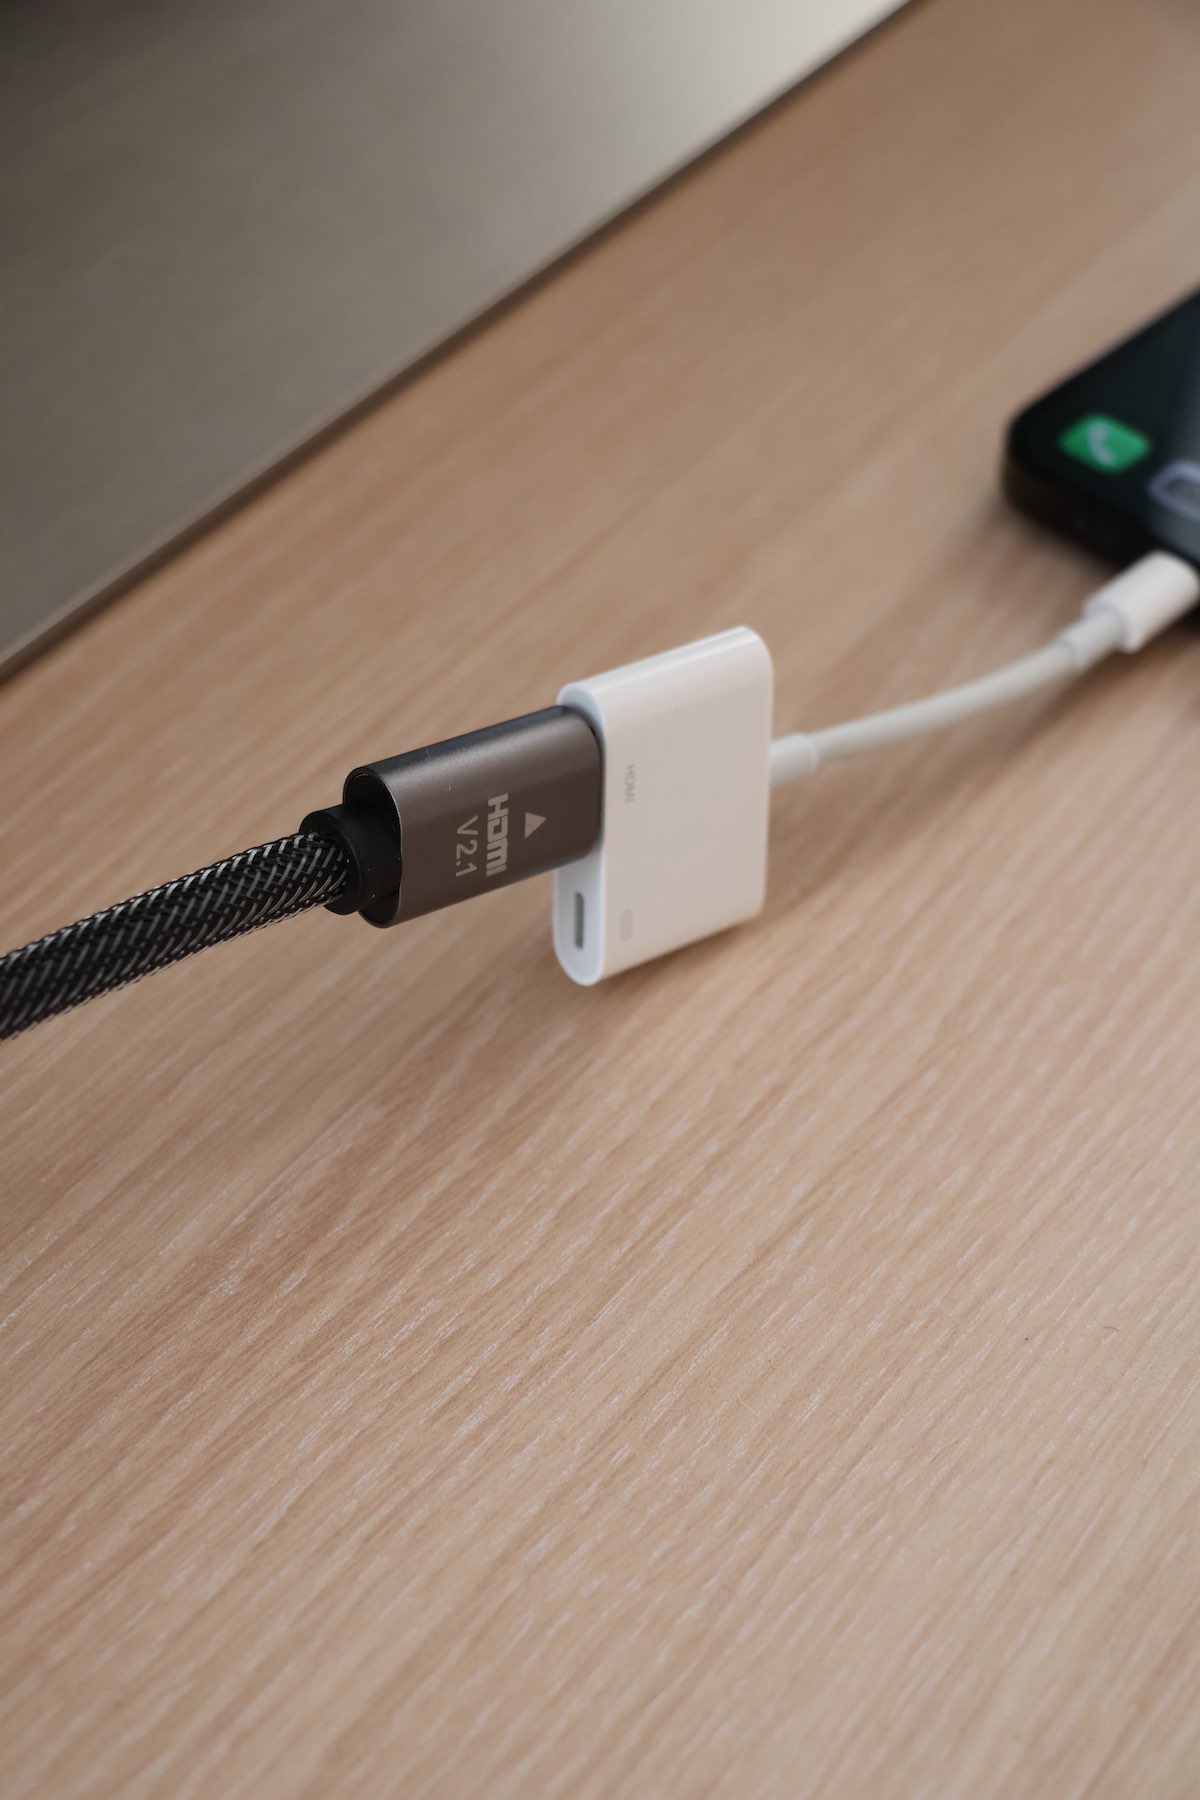 Connect an HDMI cable to iPhone's Lightning adapter